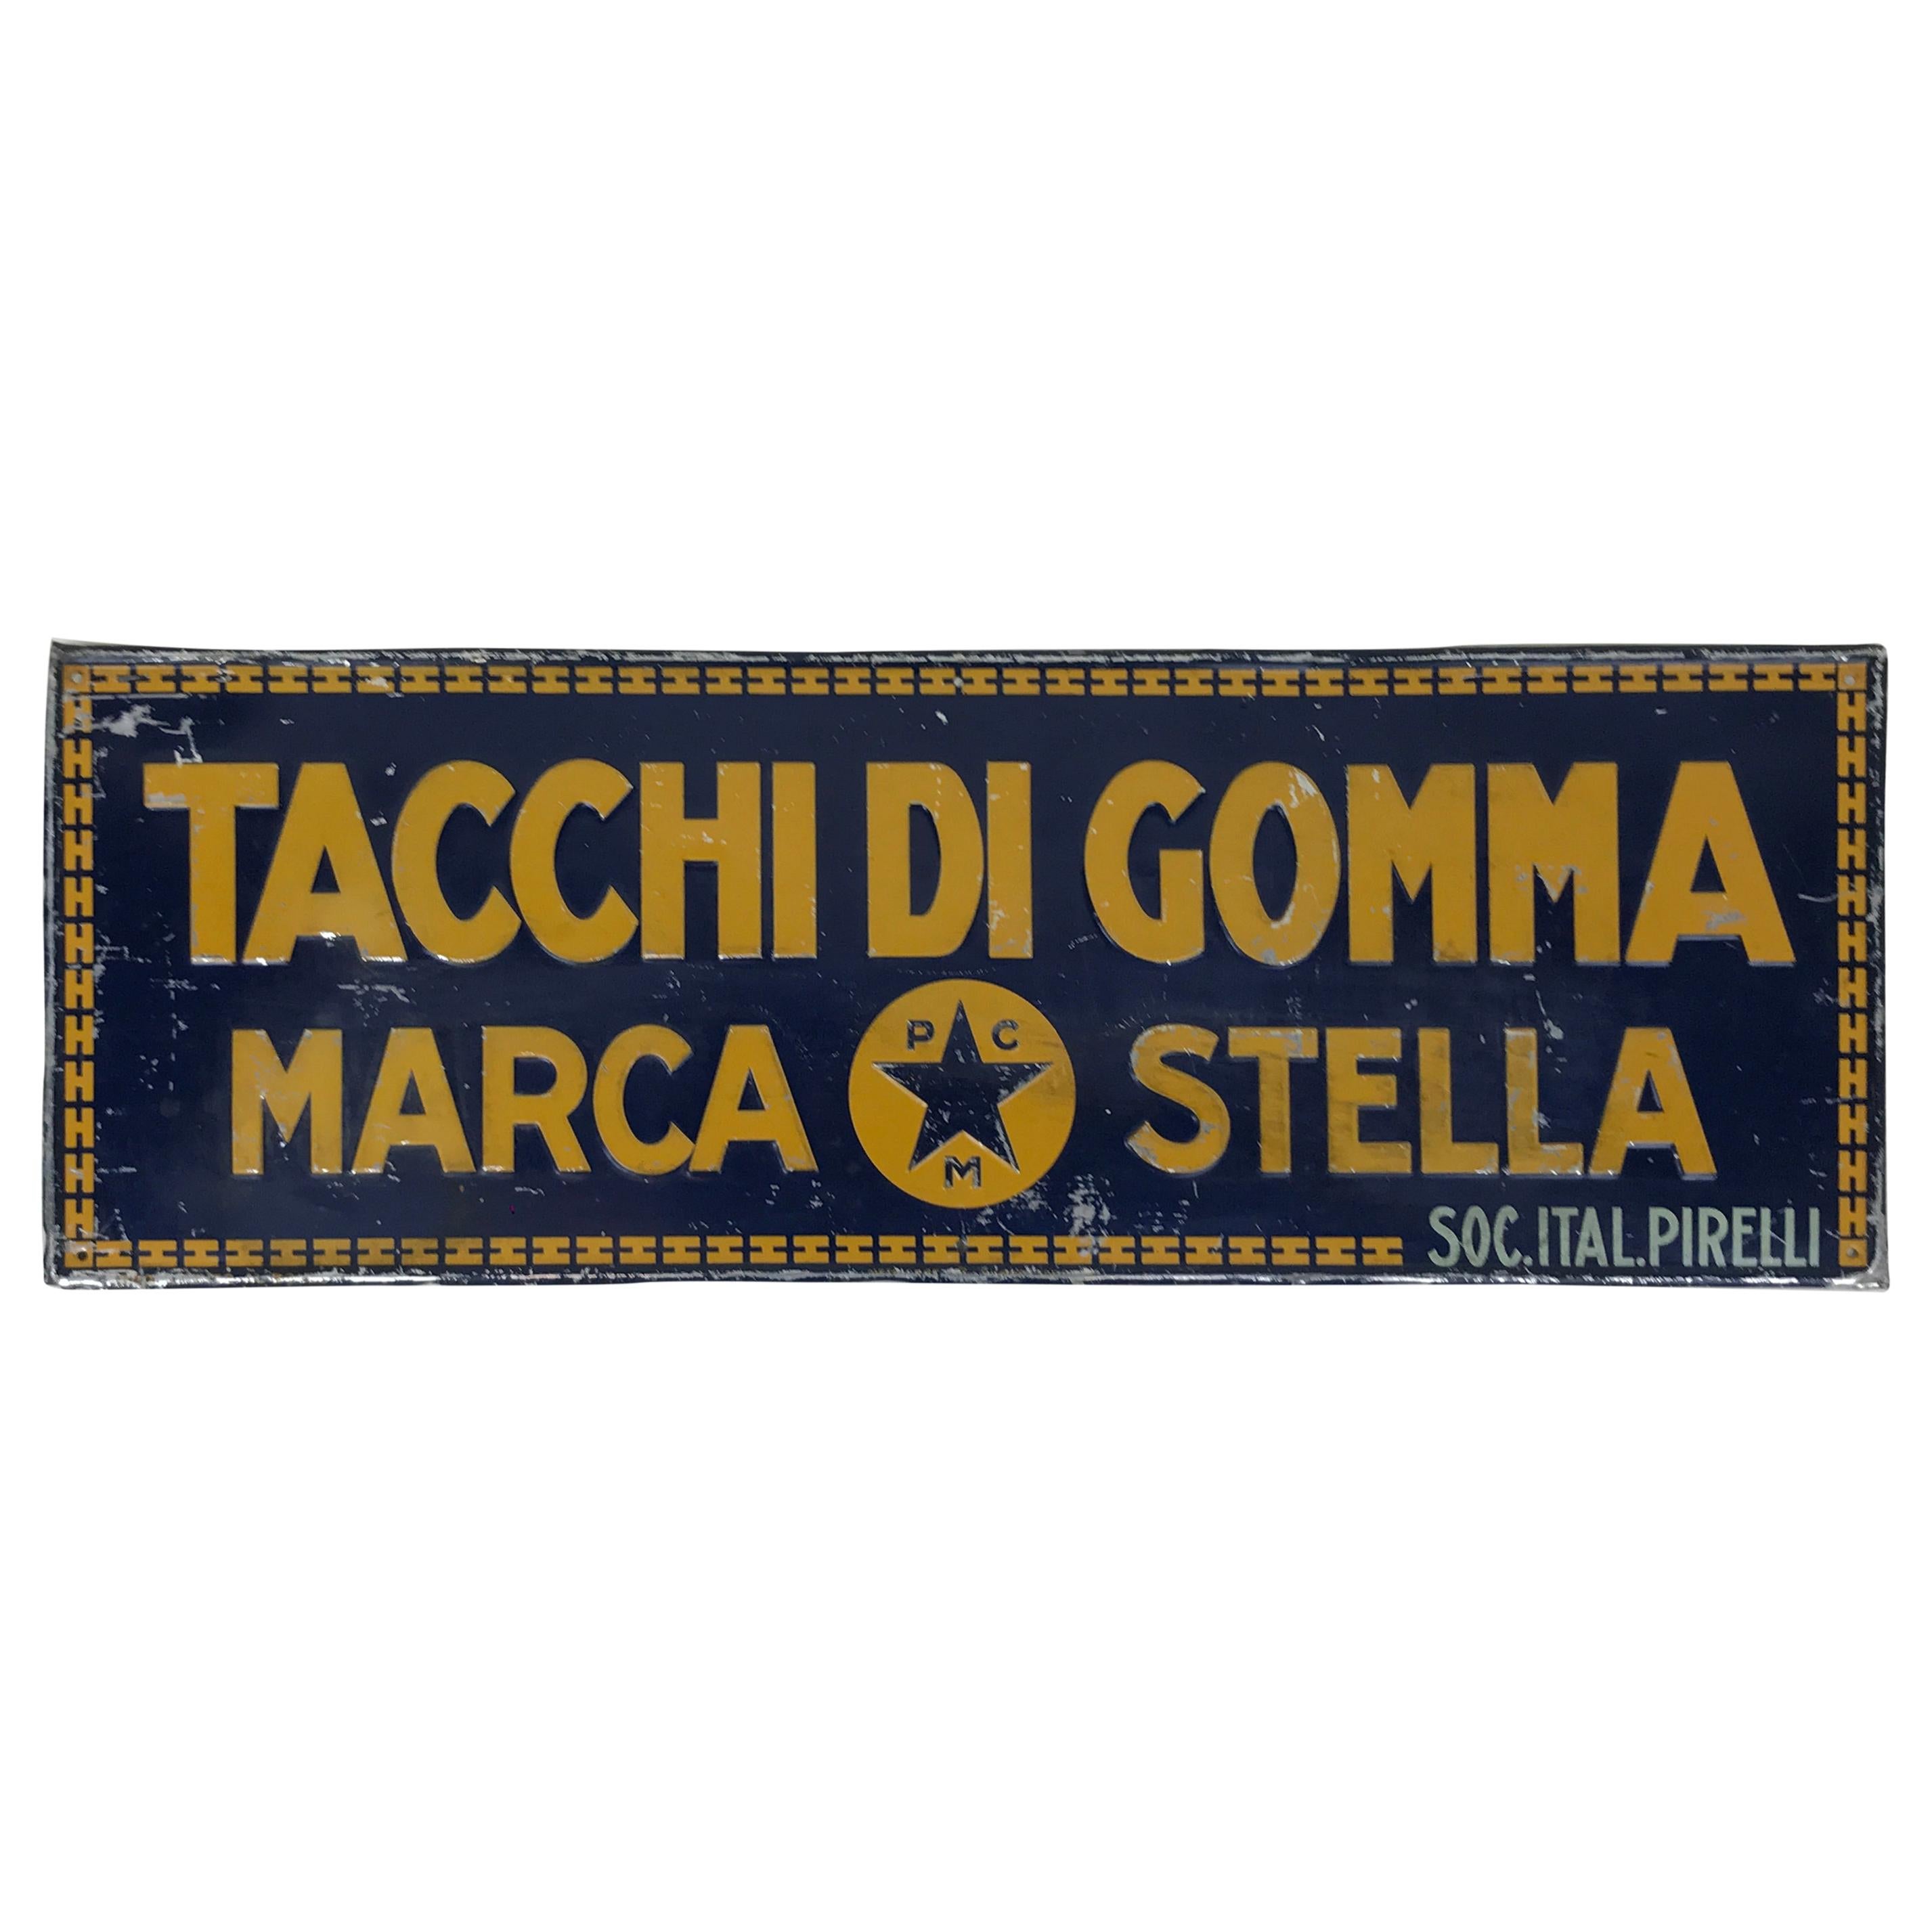 1940s Vintage Italian Tin Sign "Tacchi di Gomma" or "Rubber Heel" by Pirelli For Sale